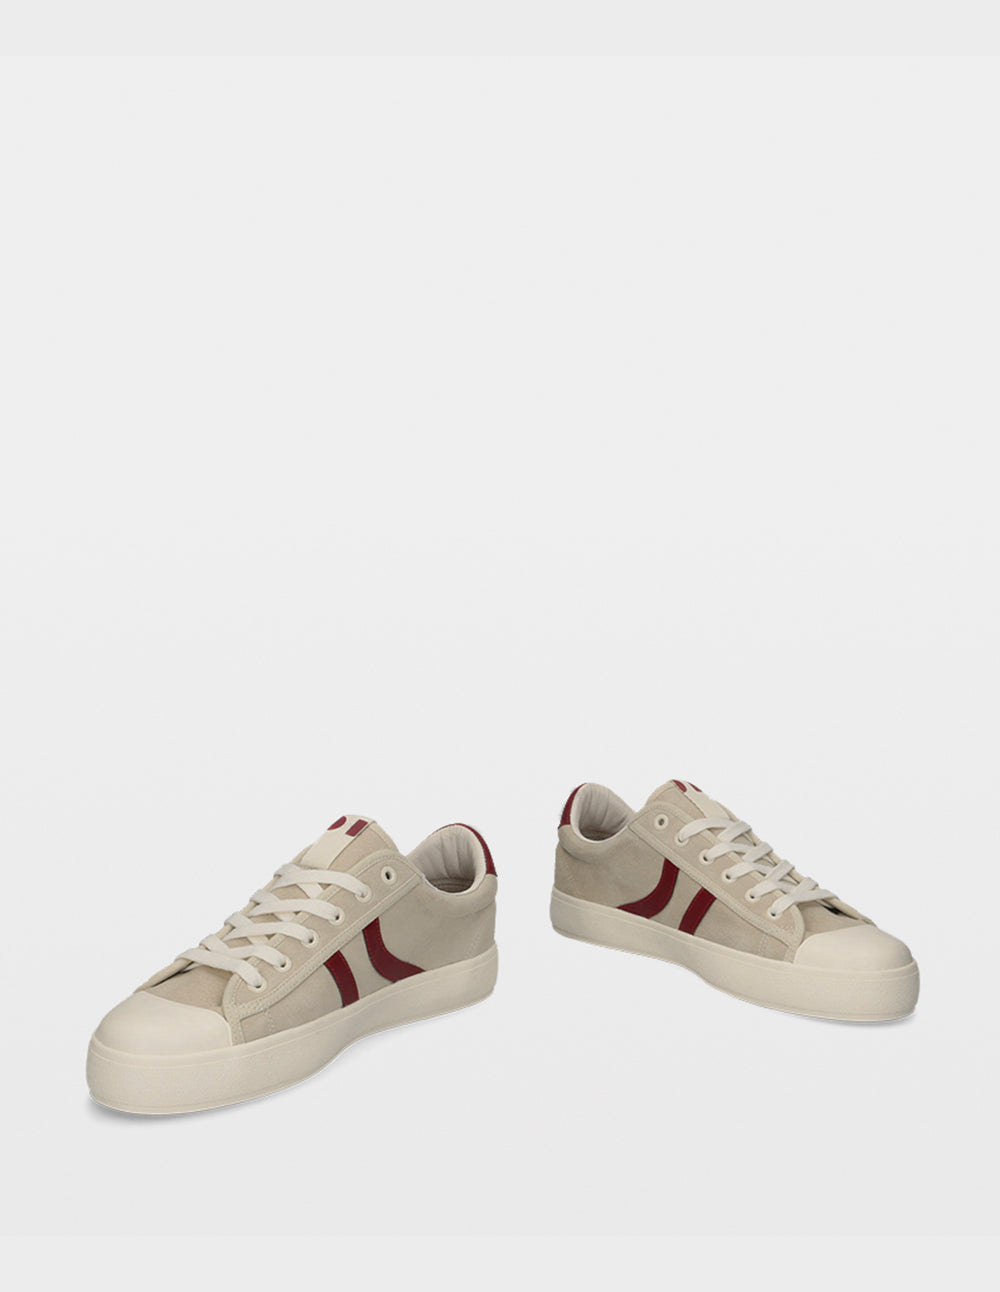 ICON-ONE BEIGE/BURGUNDY LEATHER HOMBRE